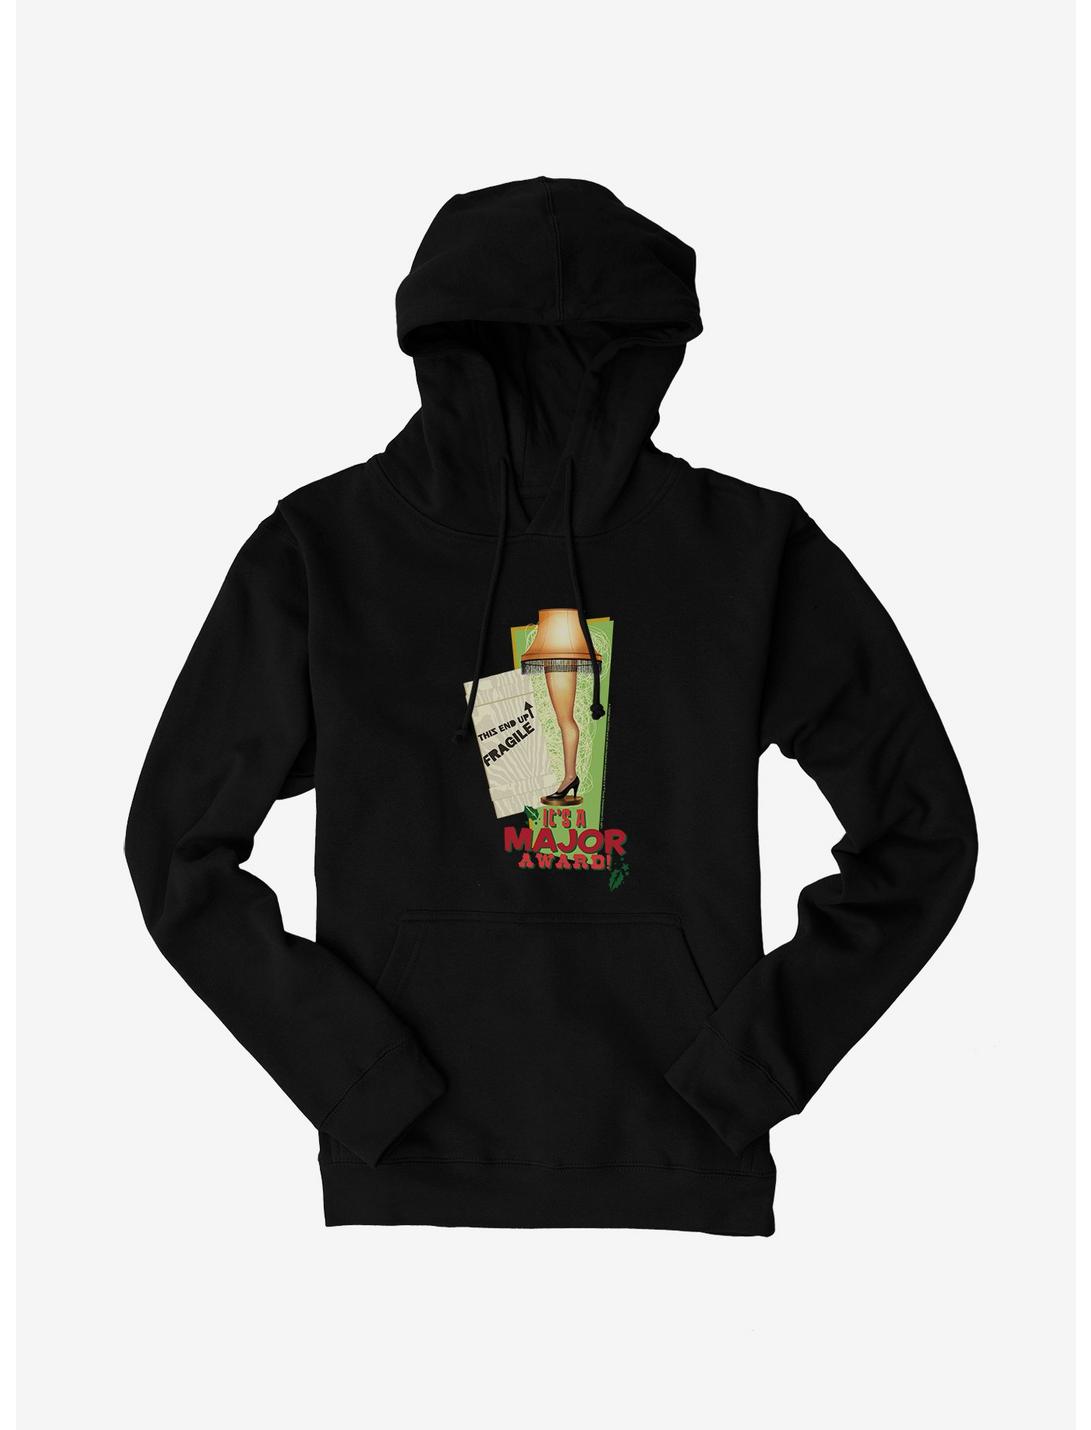 A Christmas Story This End Up Fragile Leg Lamp Hoodie, , hi-res